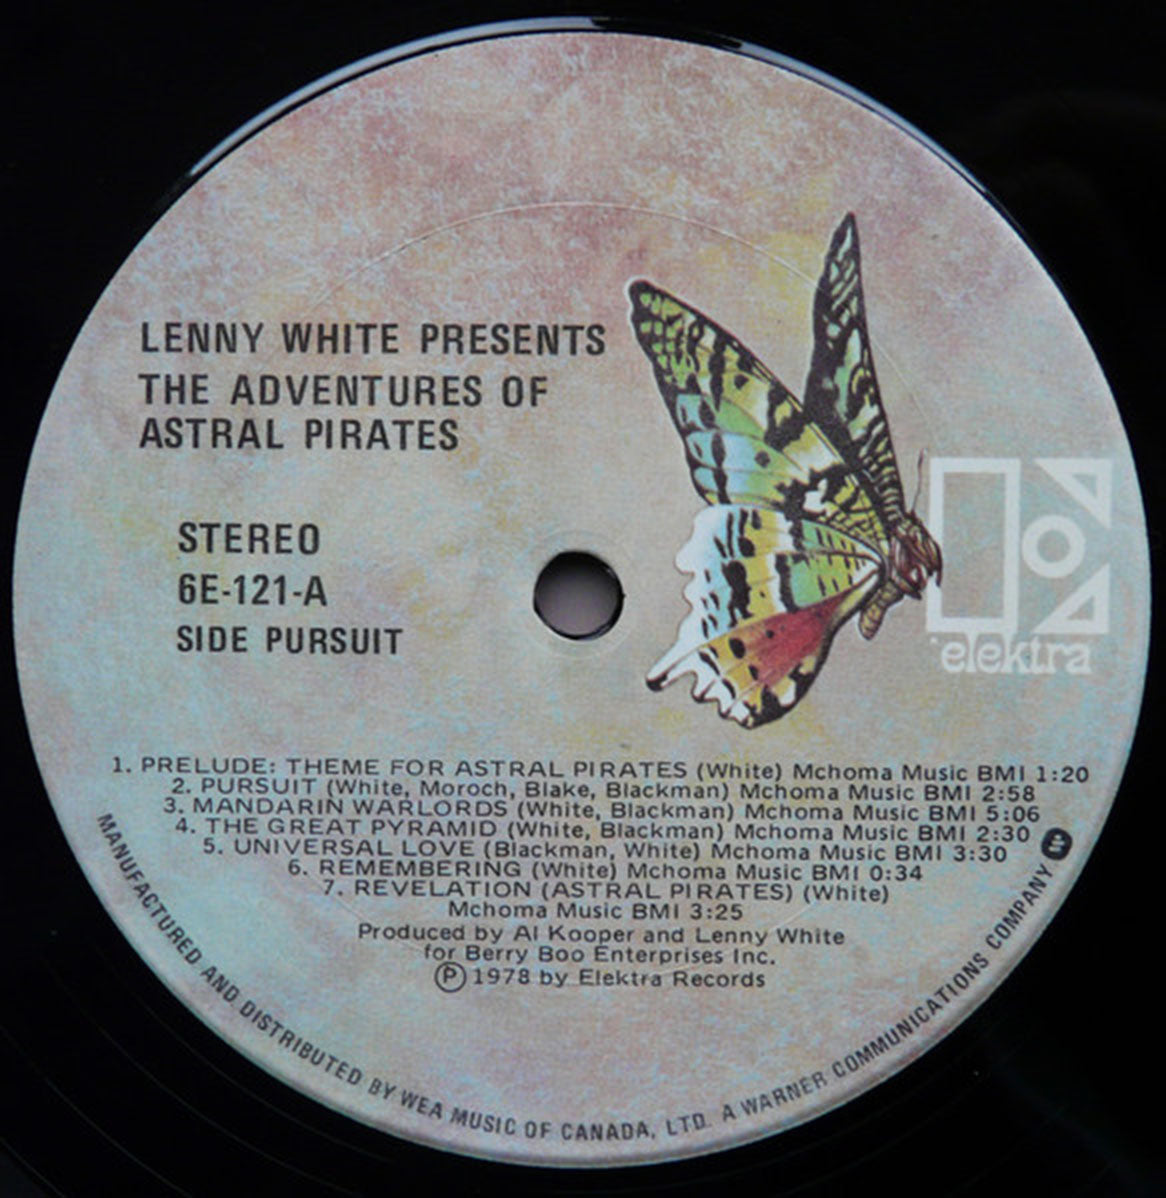 Lenny White – Presents The Adventures of Astral Pirates